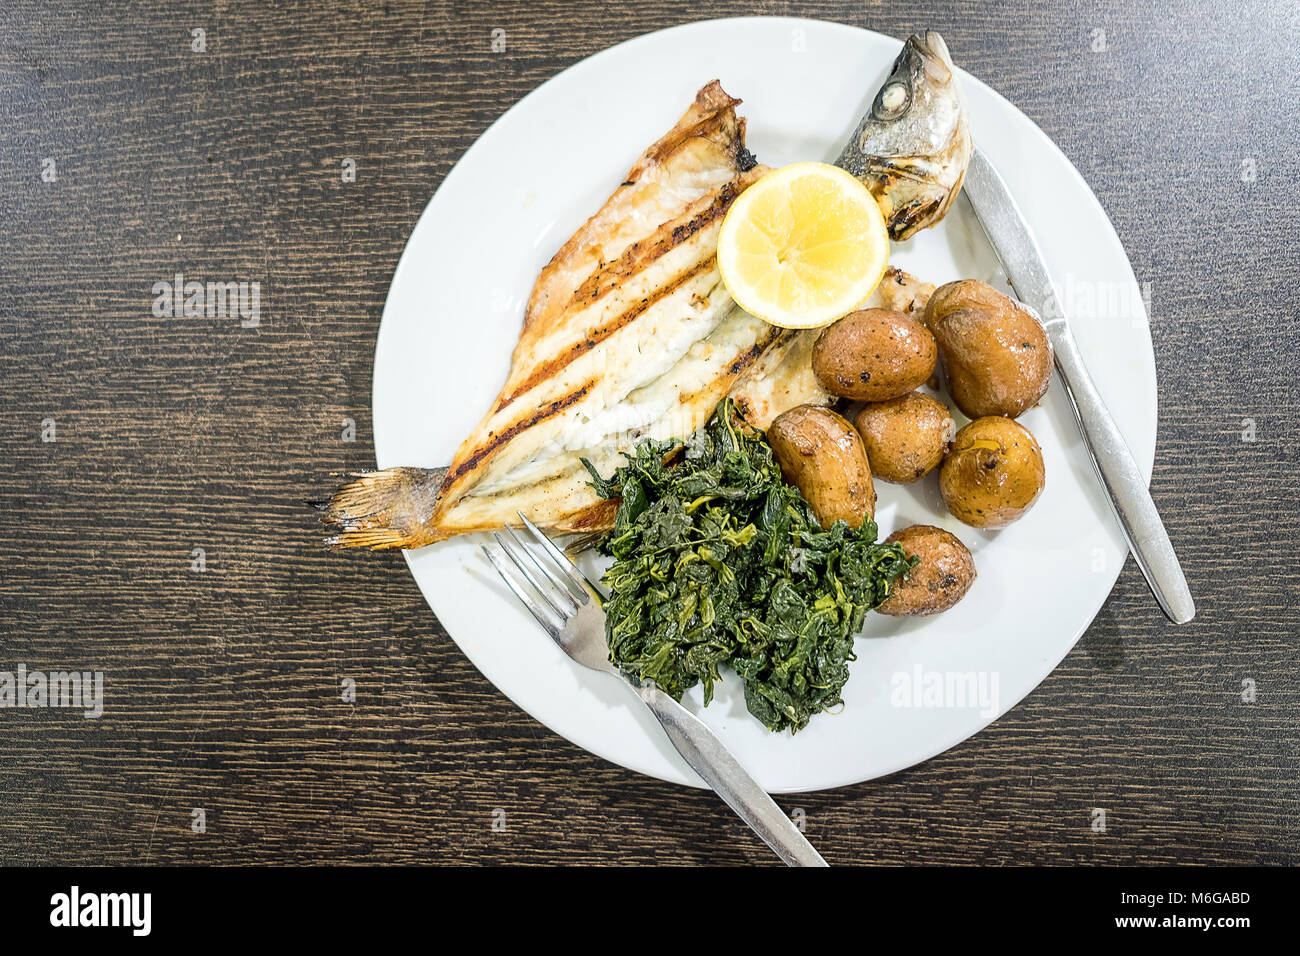 Barbecued sea bass served with lemon, baked potatoes and spinach on white plate Stock Photo